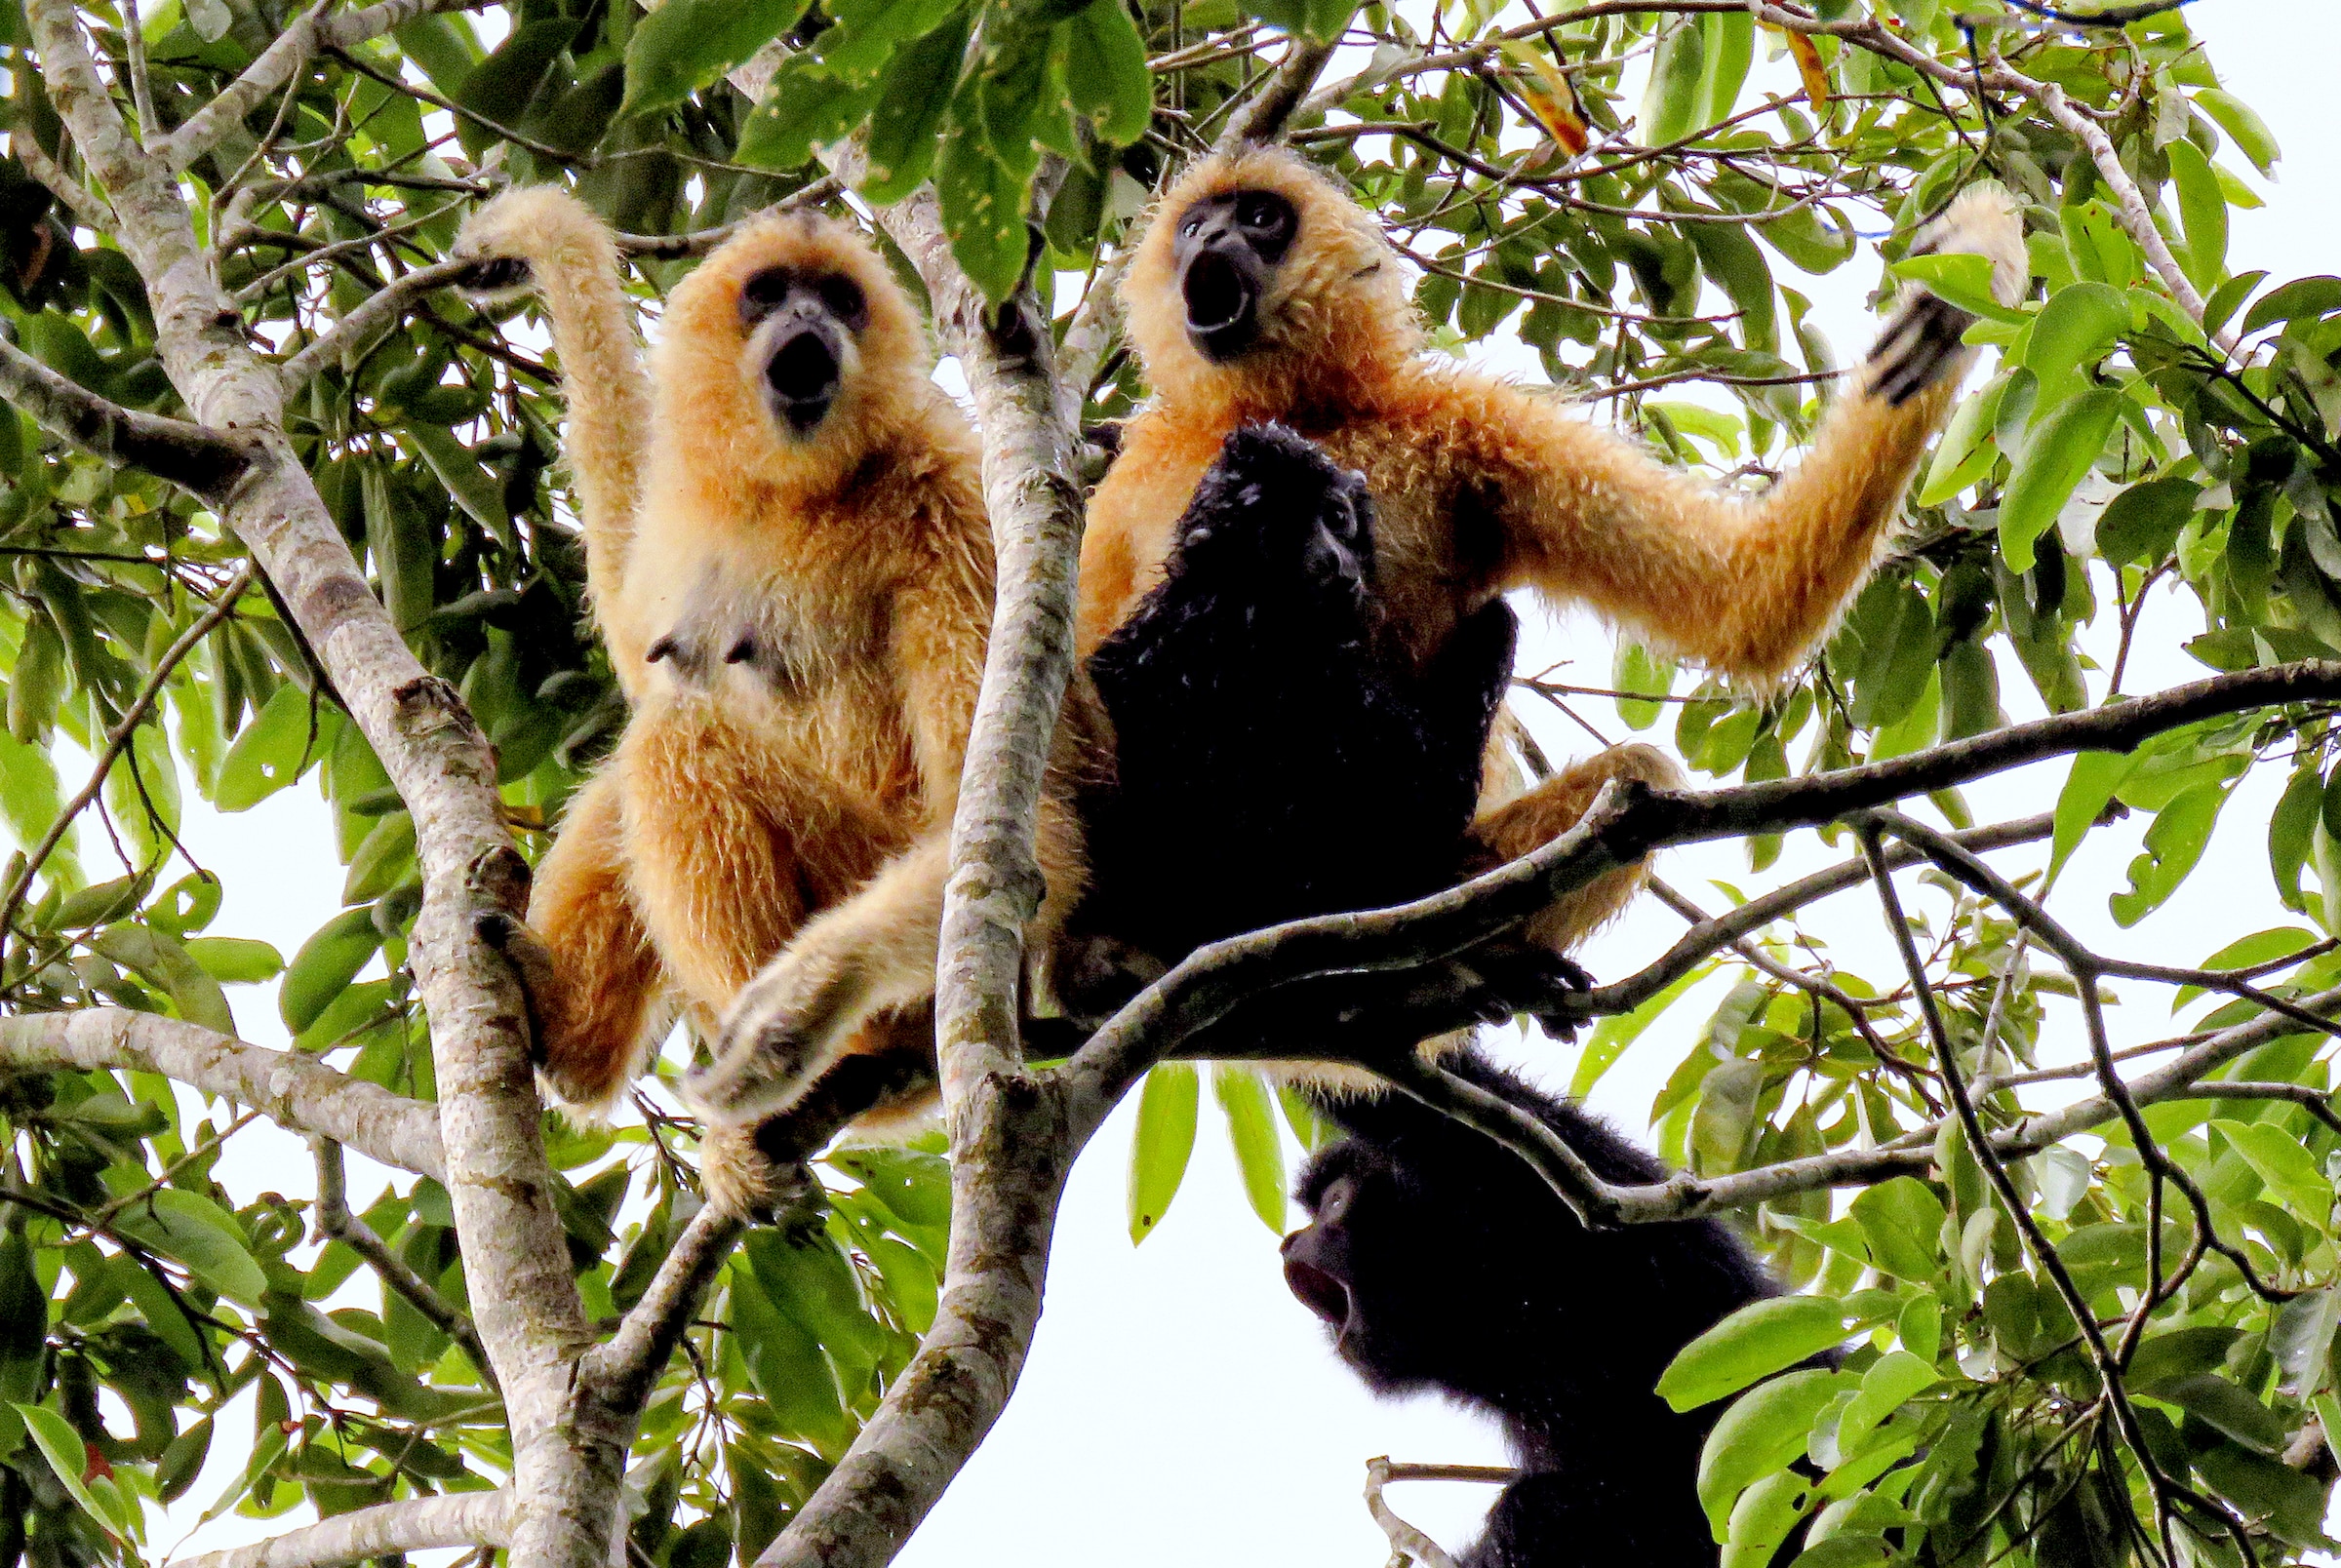 A family of gibbons sitting in the forest canopy